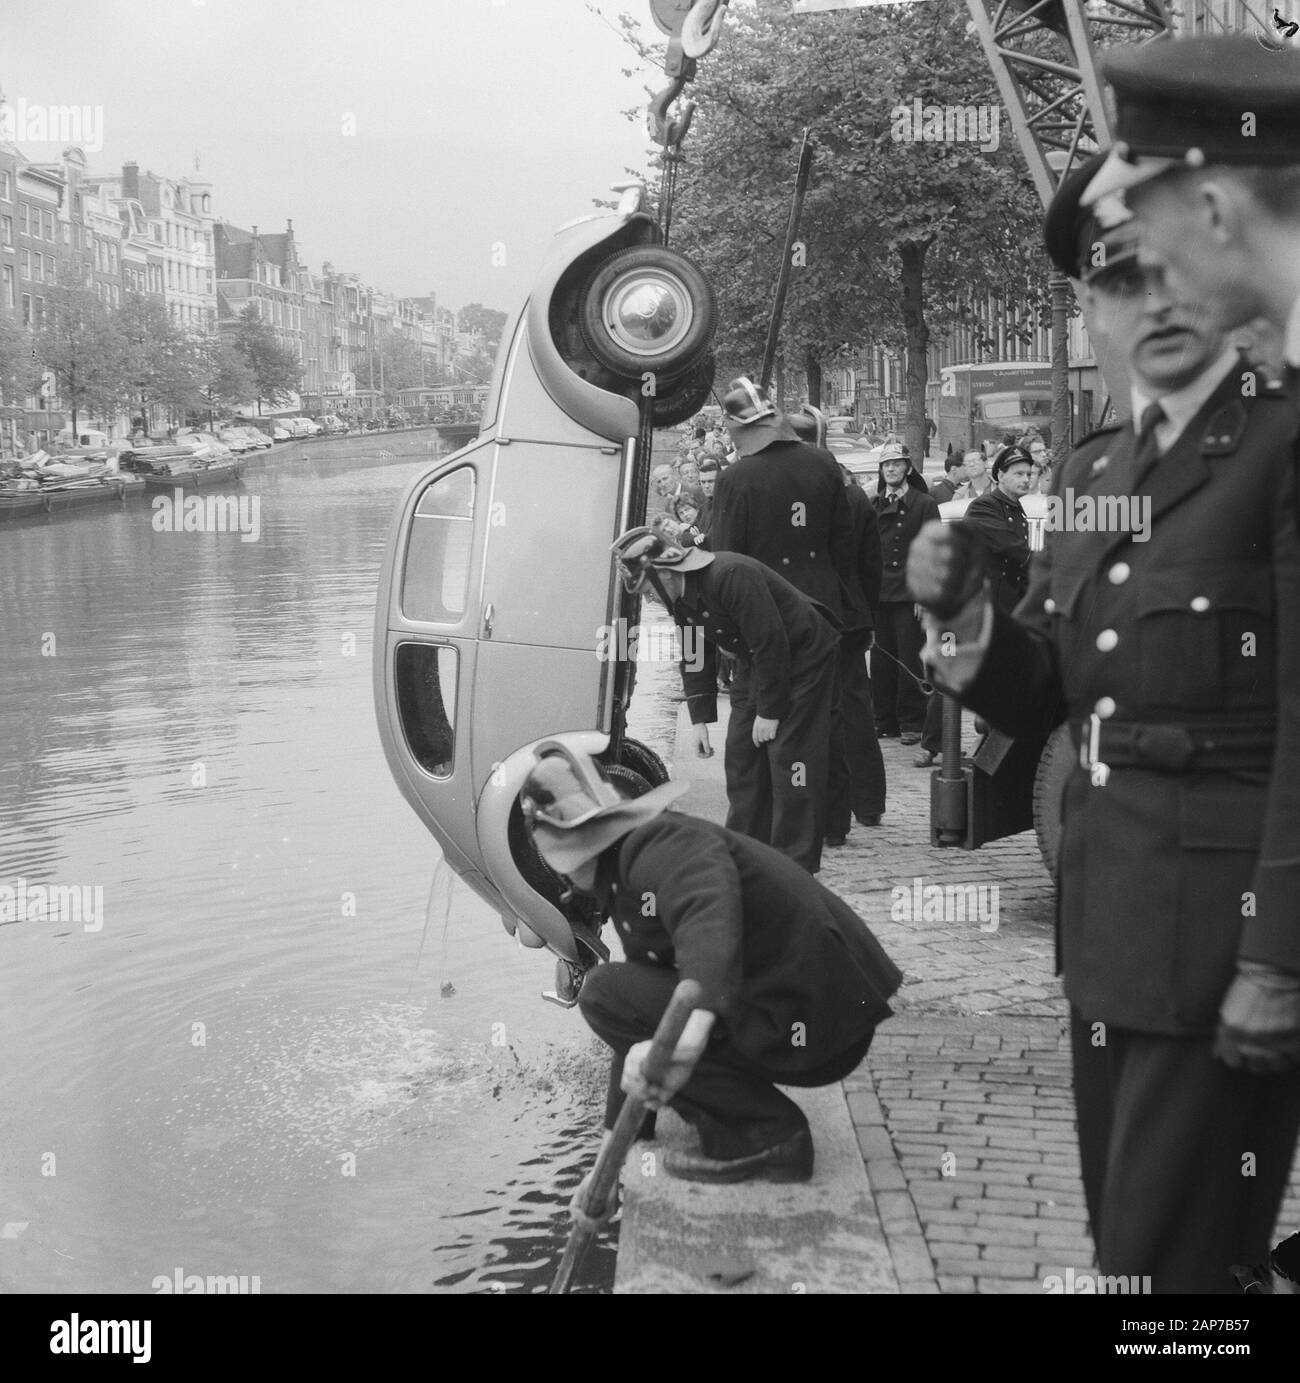 Autocollision crossroads Reguliersgracht Keizersgracht, Volkswagen is removed from the canal Date: September 21, 1960 Location: Amsterdam, Noord-Holland Keywords: Autobotsingen, canals Setting name: Volkswagen Stock Photo